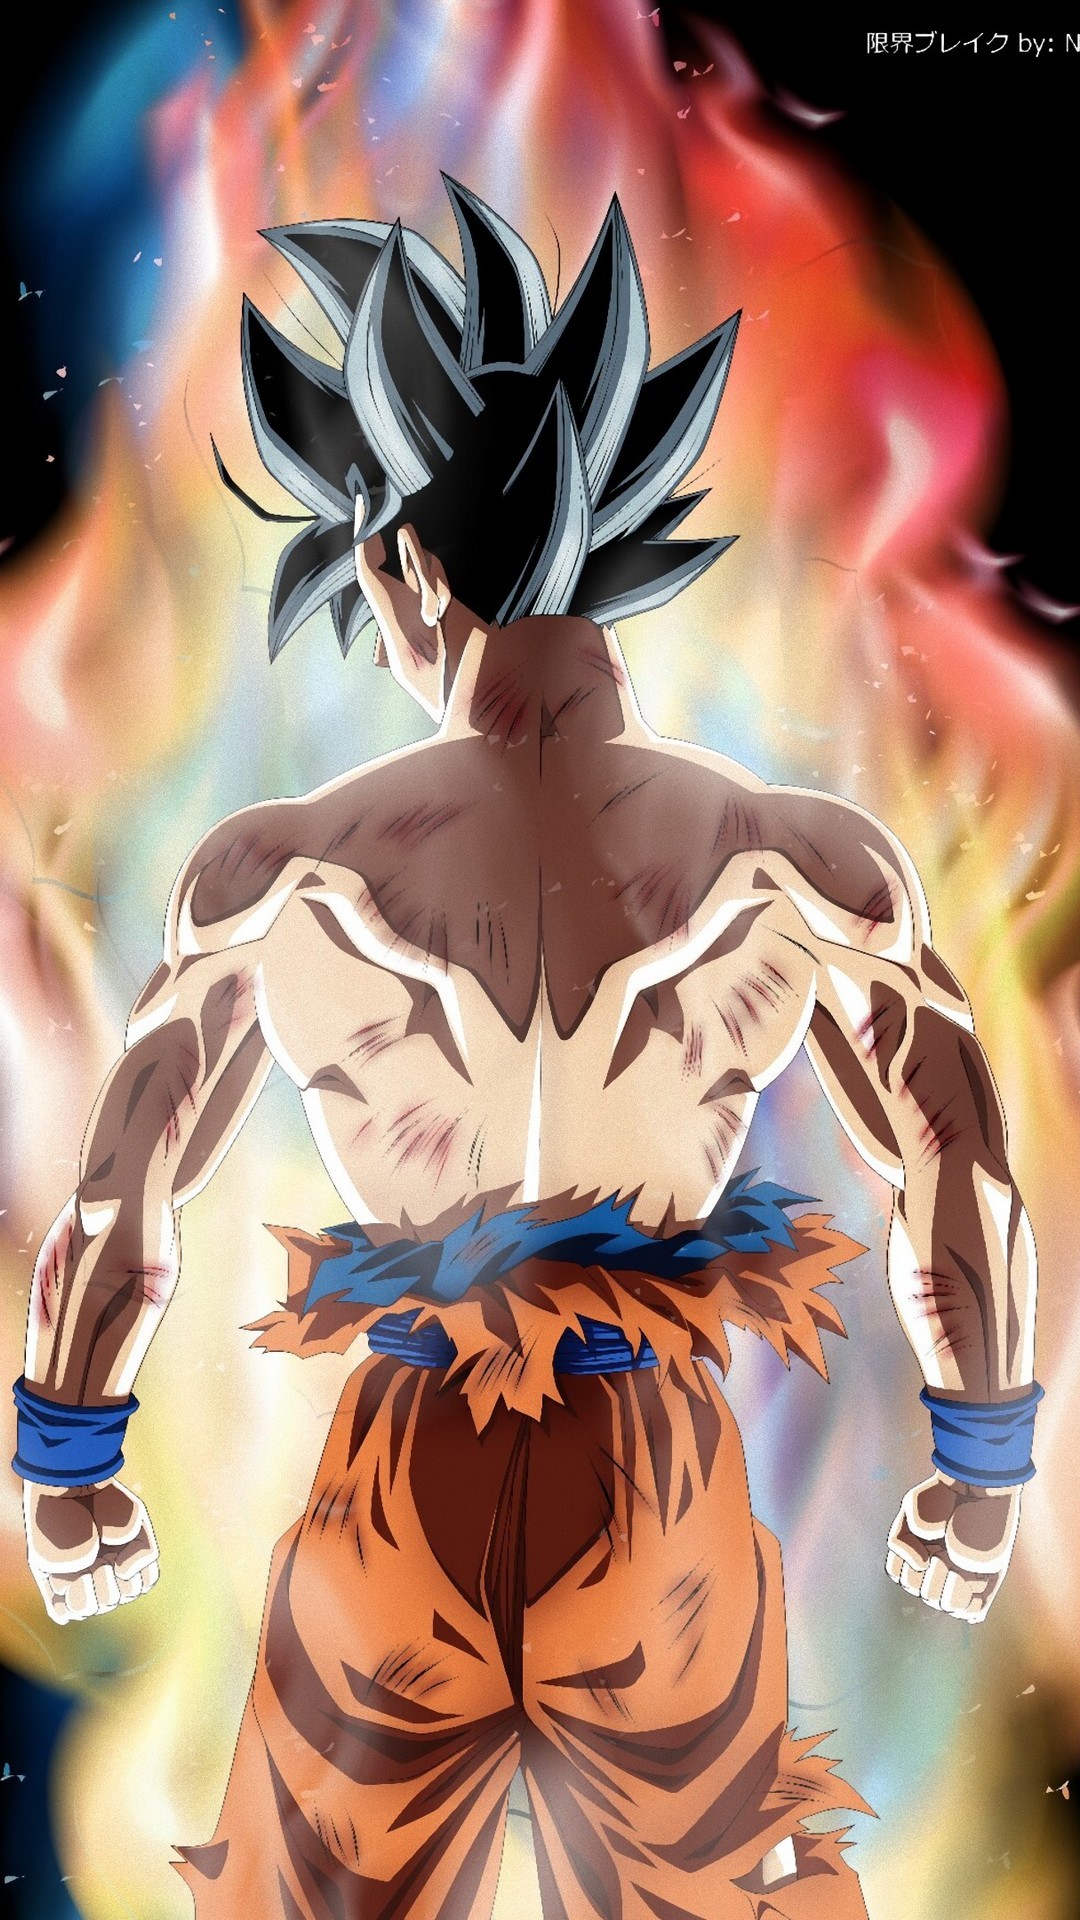 Goku Images Wallpaper iPhone with image resolution 1080x1920 pixel. You can make this wallpaper for your iPhone 5, 6, 7, 8, X backgrounds, Mobile Screensaver, or iPad Lock Screen